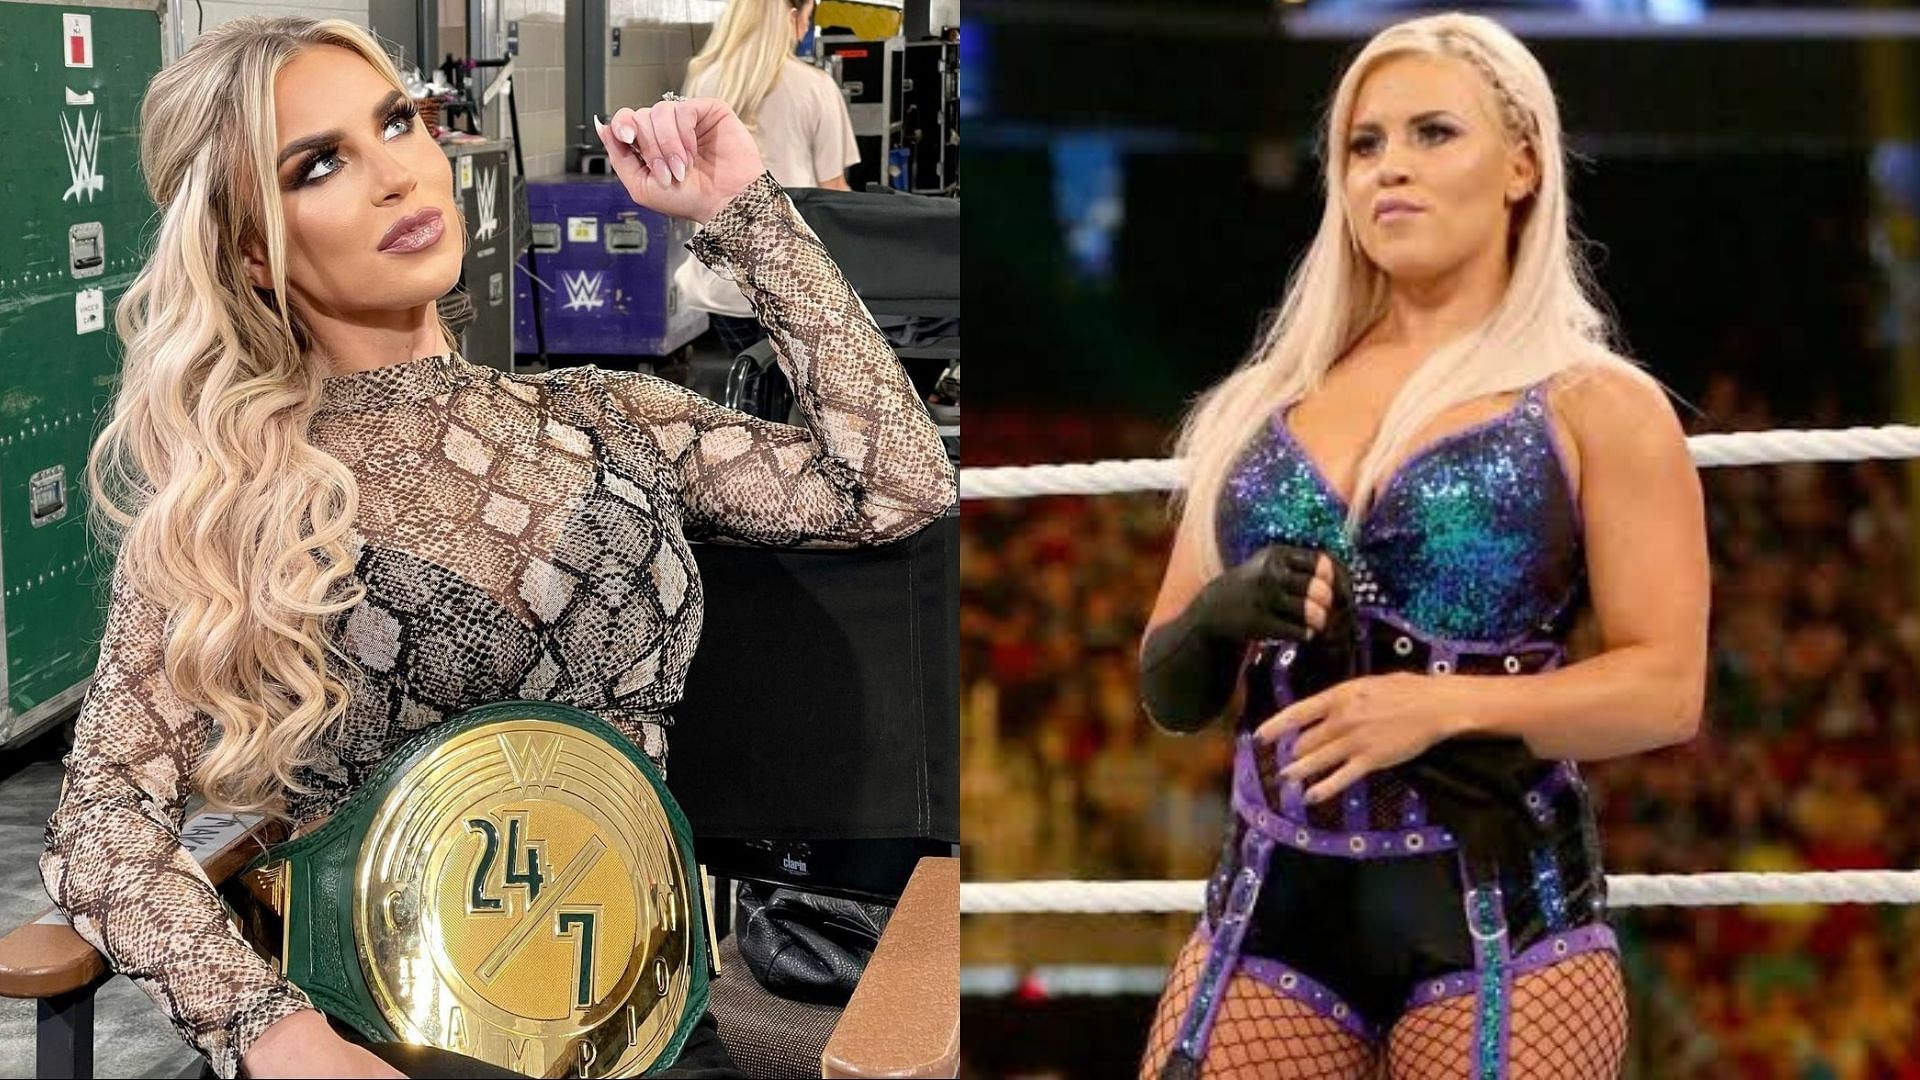 Dana Brooke is the reigning 24/7 Champion